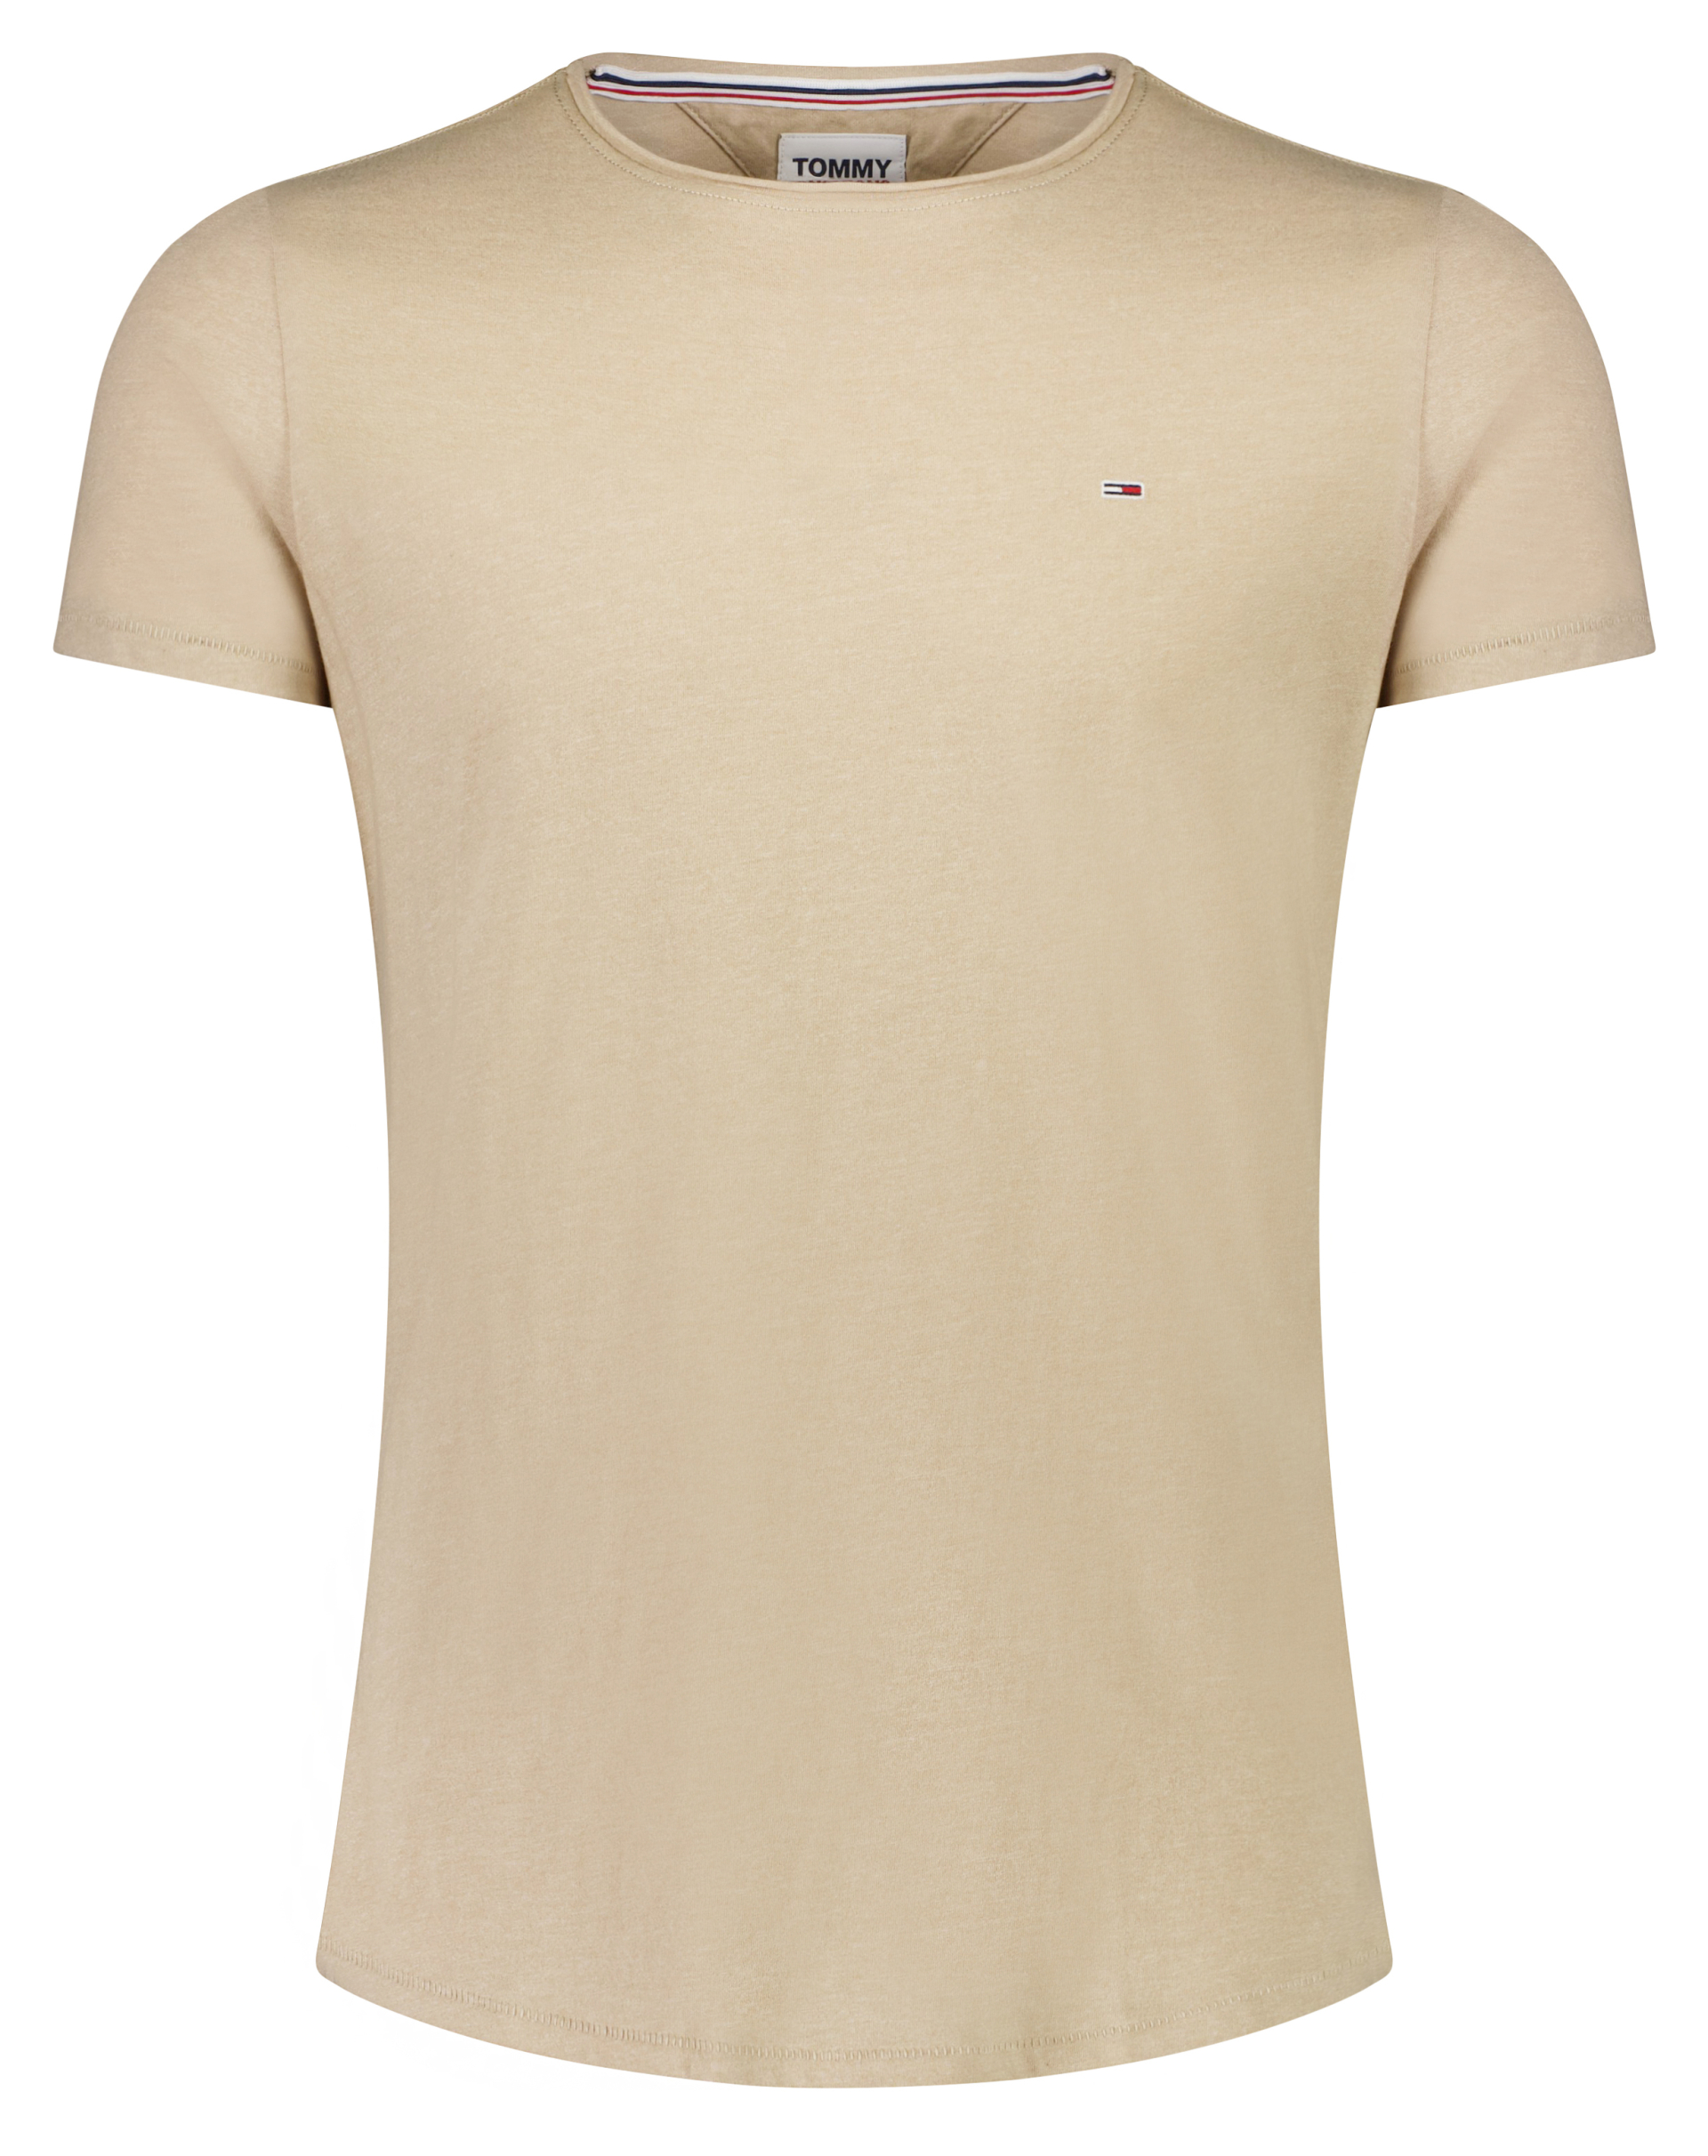 Tommy Jeans T-shirt sand / aeg beige